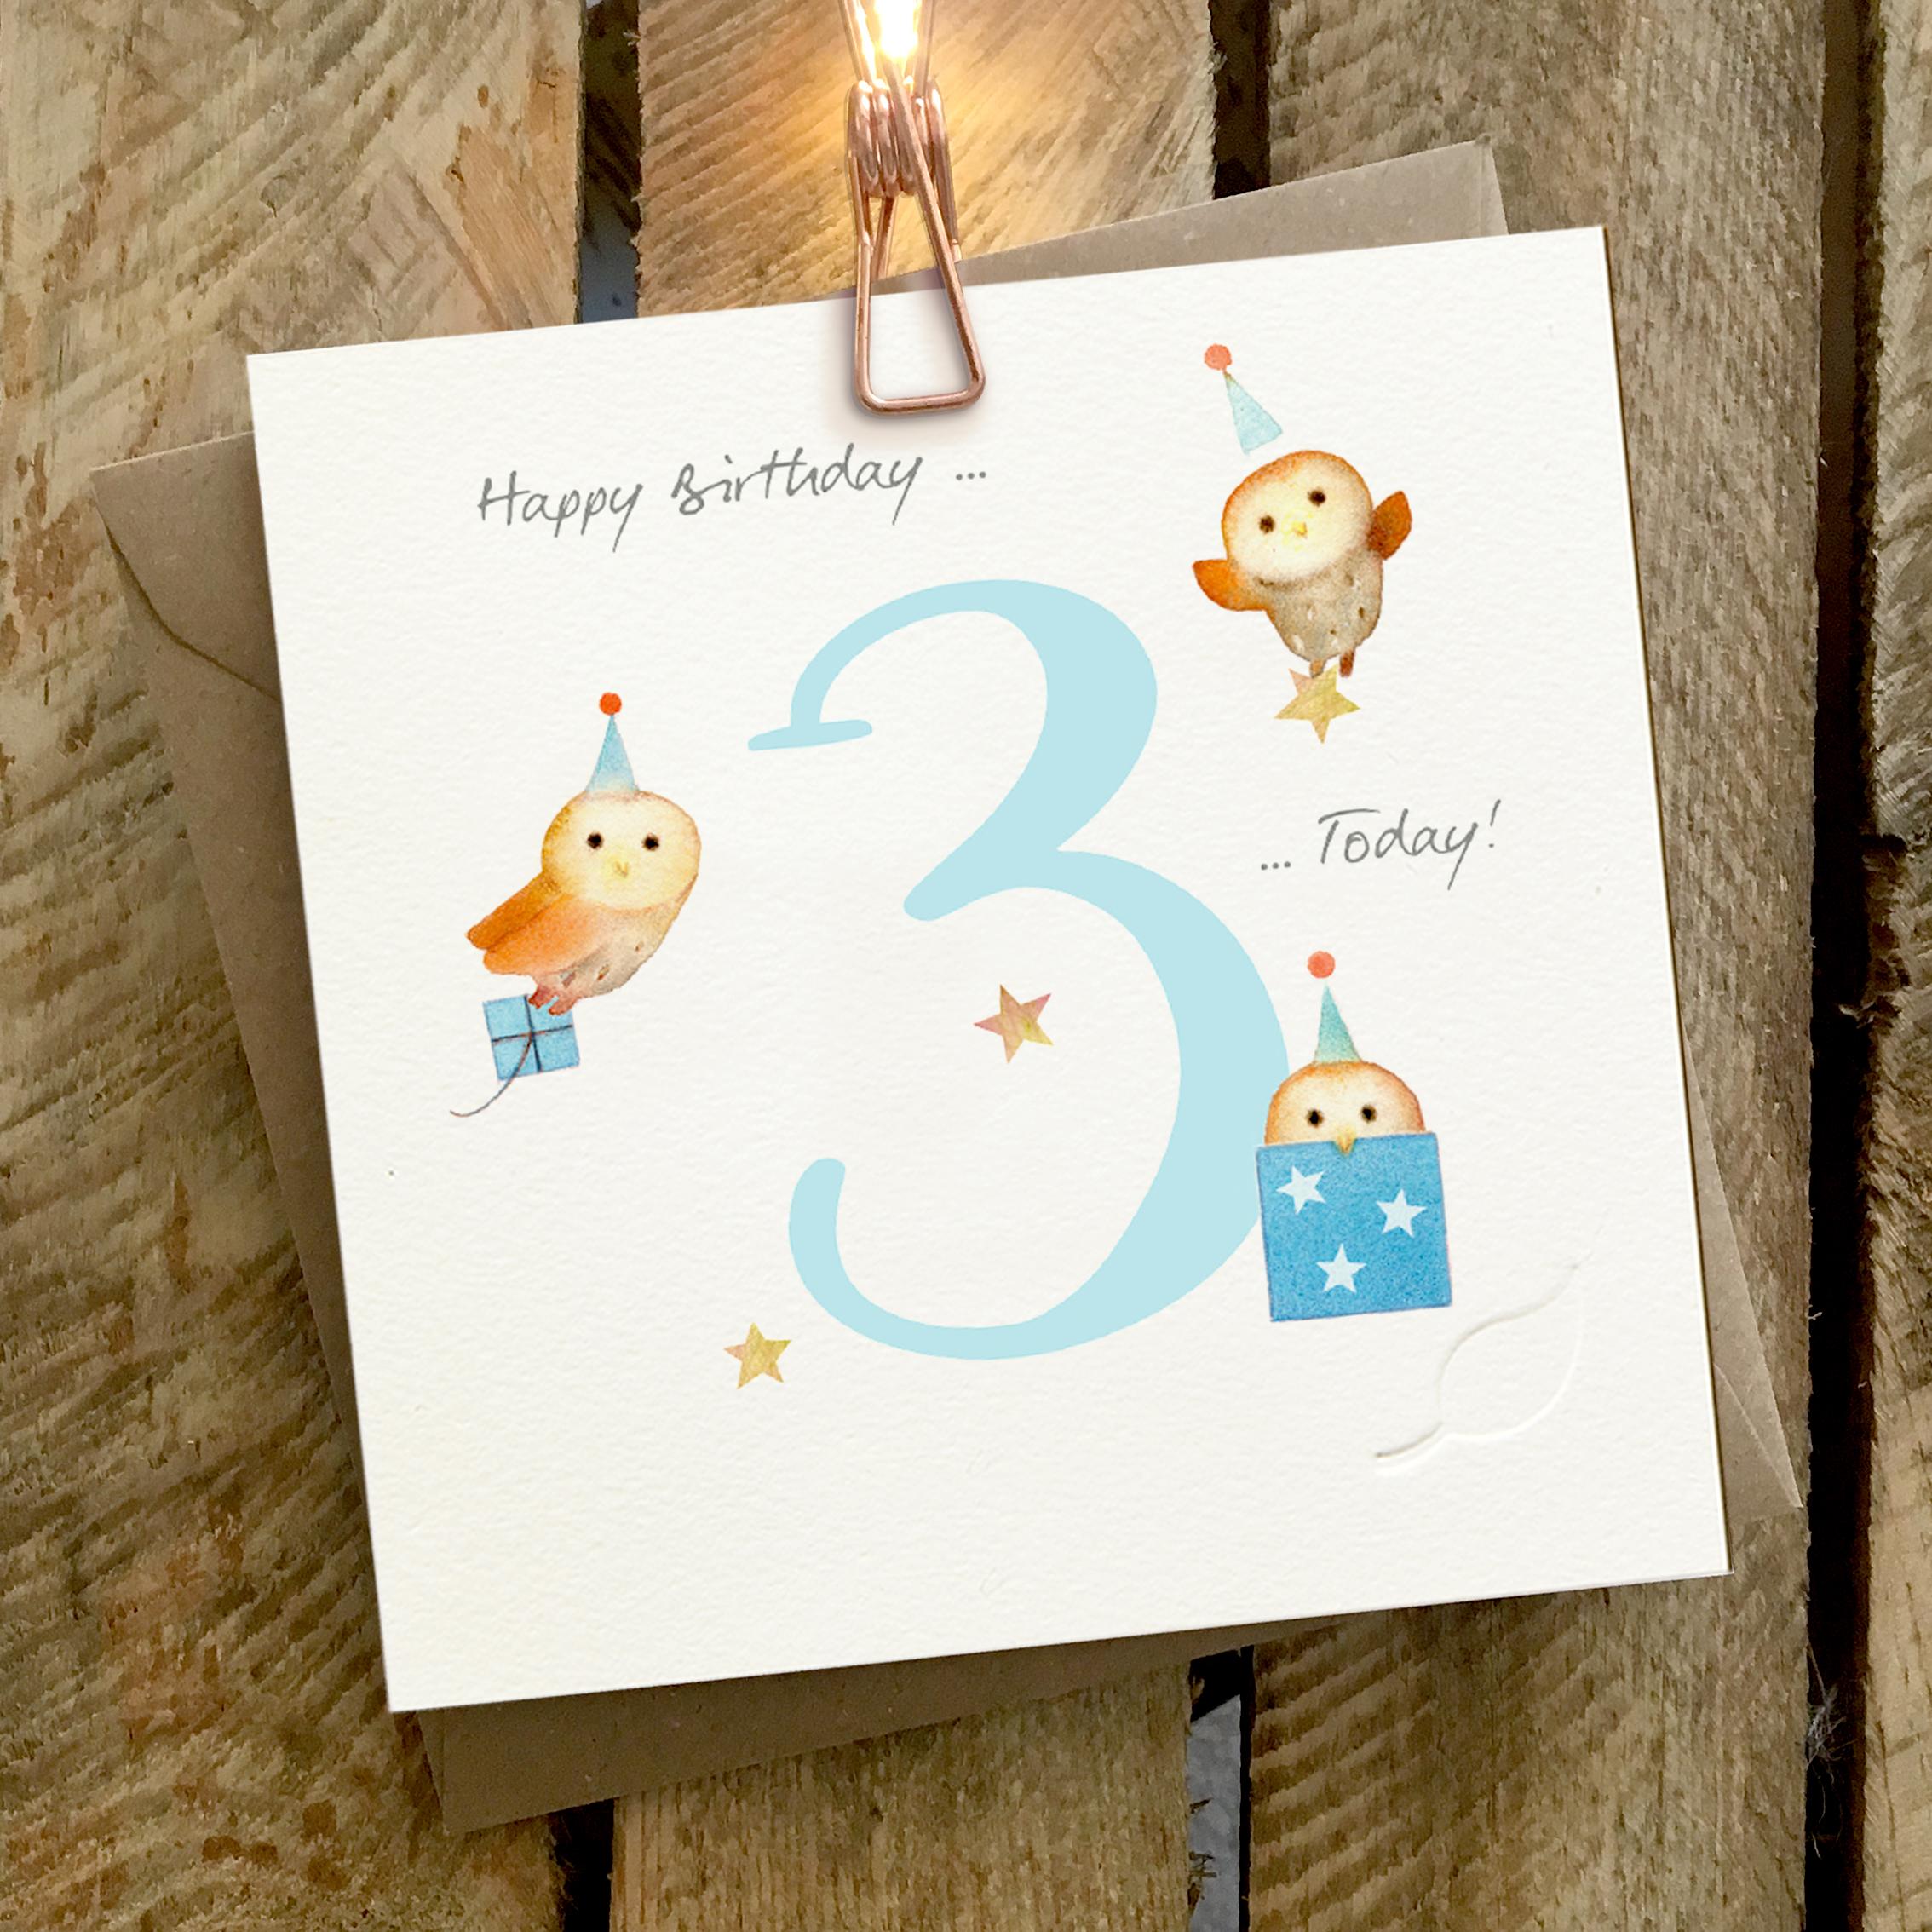 Card featuring three little owls with a large blue number 3